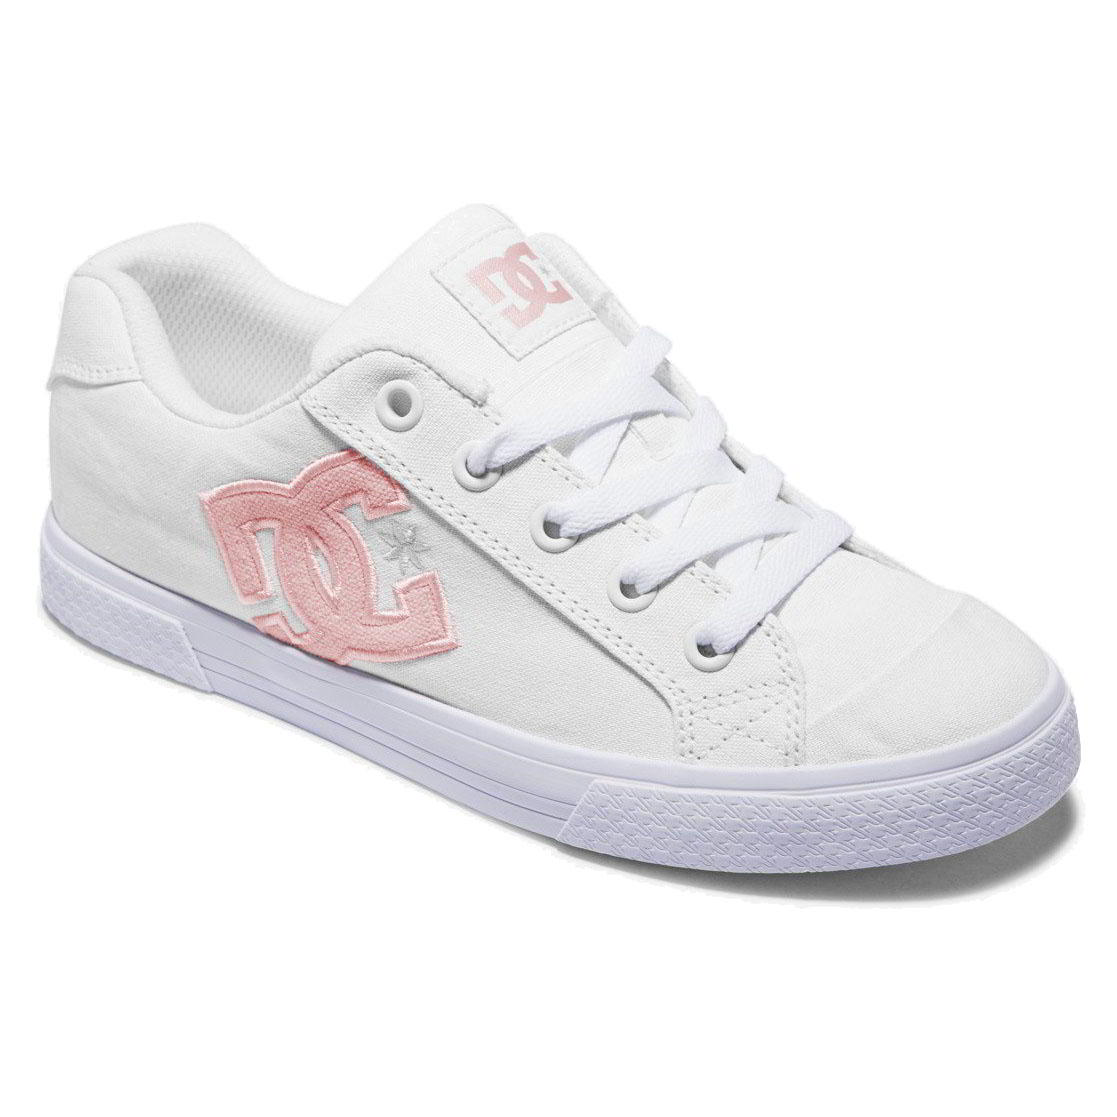 DC Women's Chelsea Skate Shoes Trainers White Pink White - UK 6.5